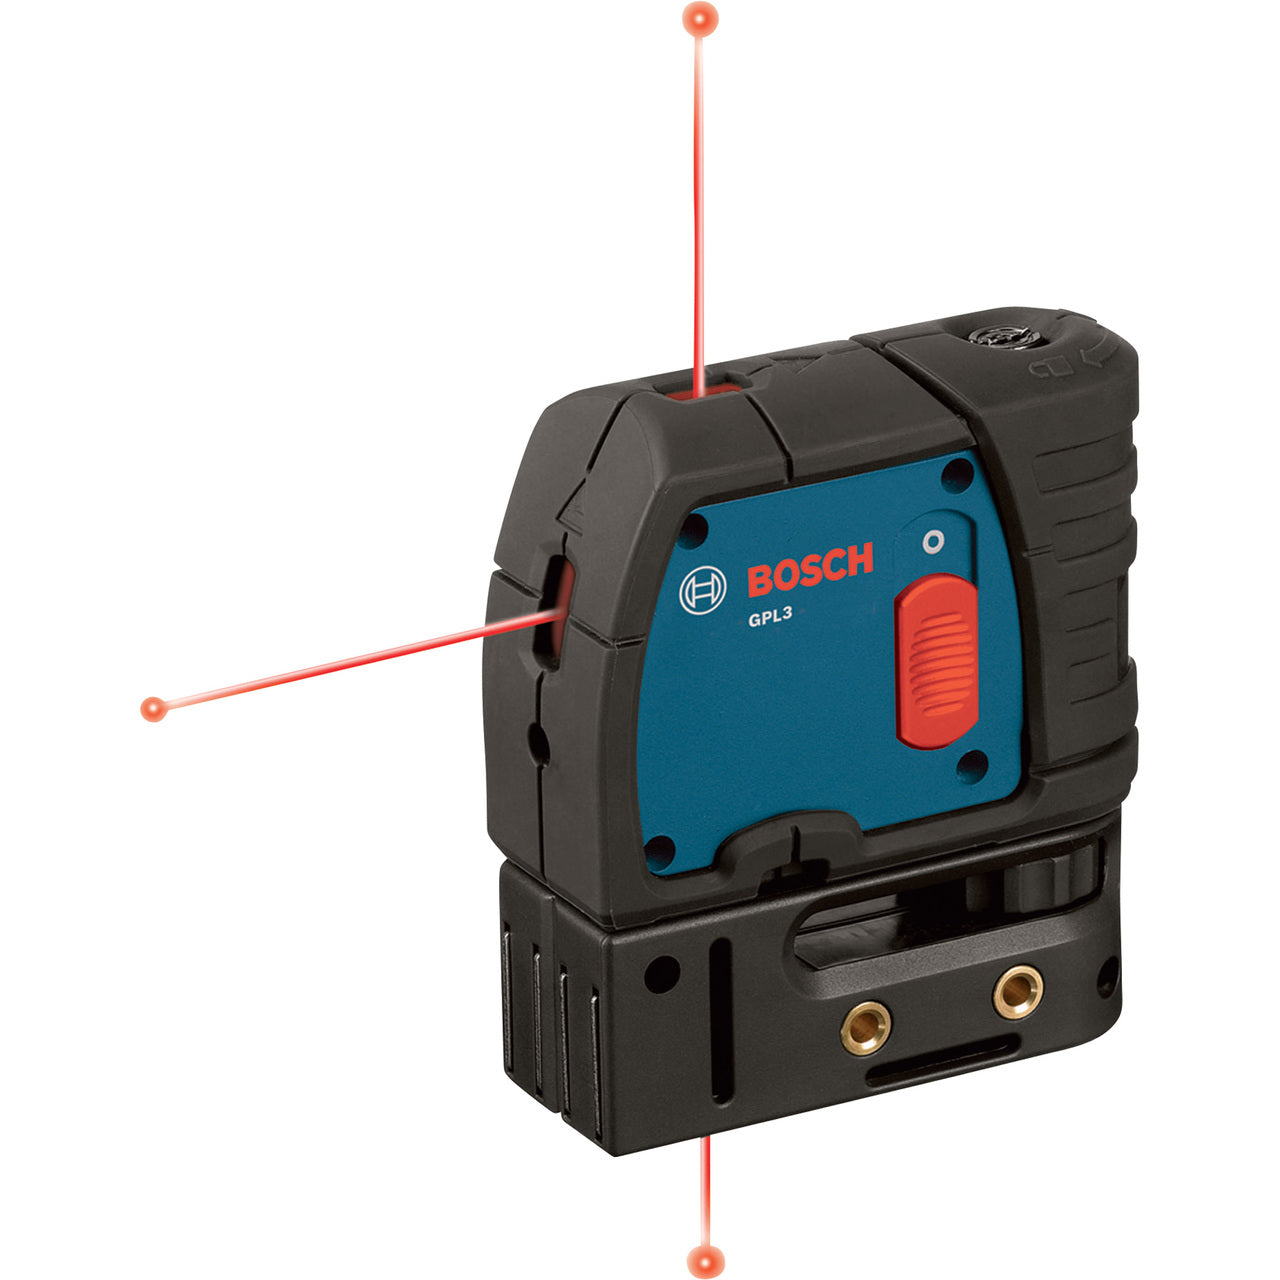 Bosch 3 Point Self-Leveling Laser Alignment with Case, GPL3